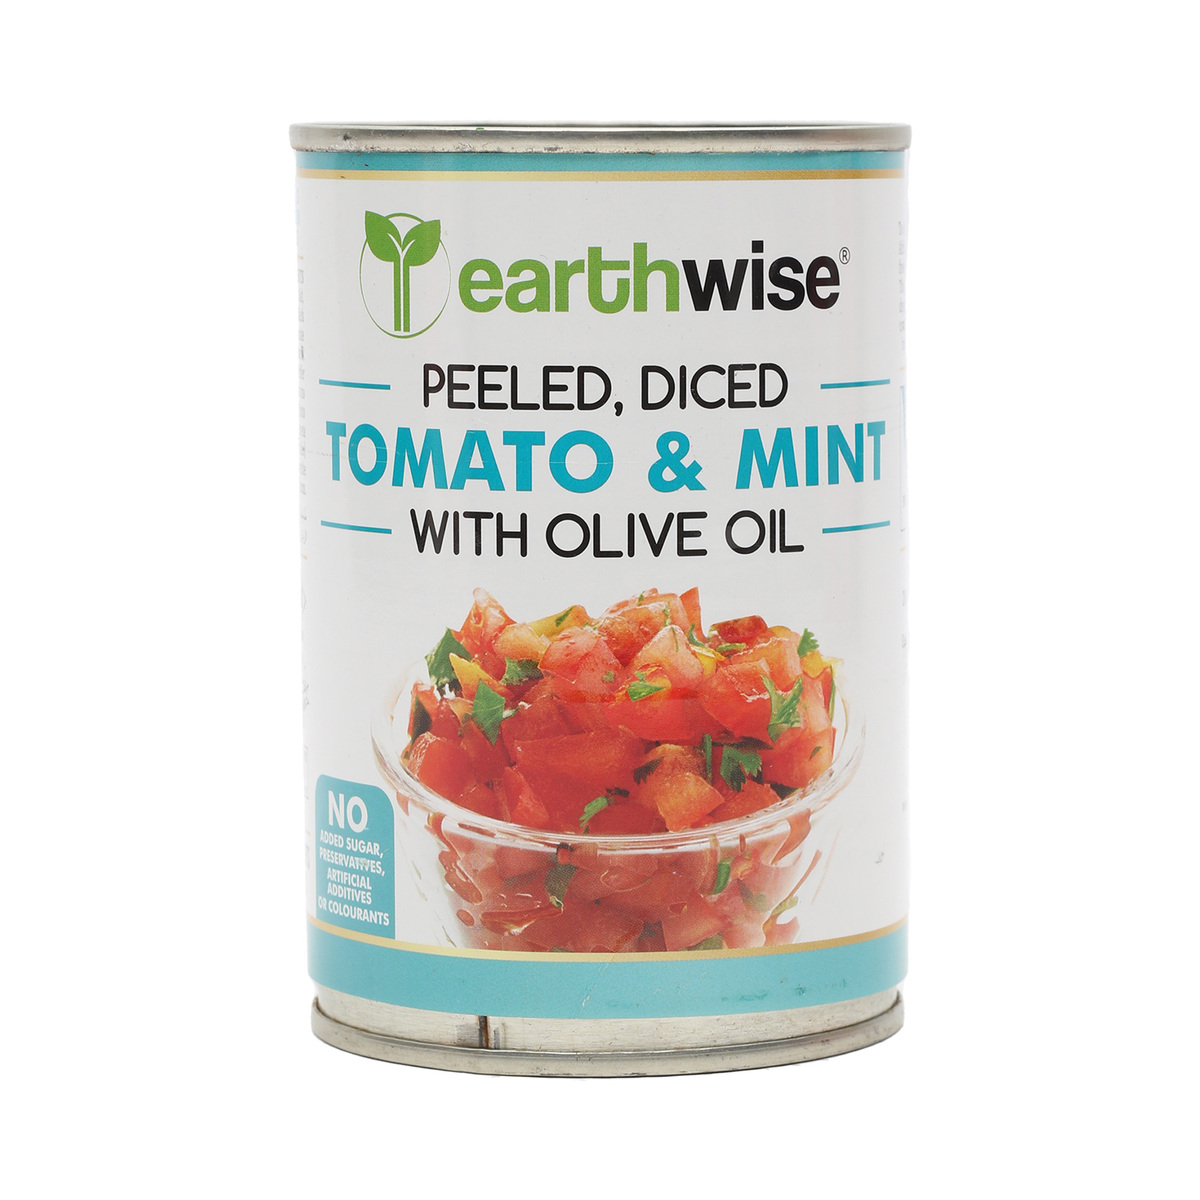 Earthwise Peeled Diced Tomato & Mint With Olive Oil 400g